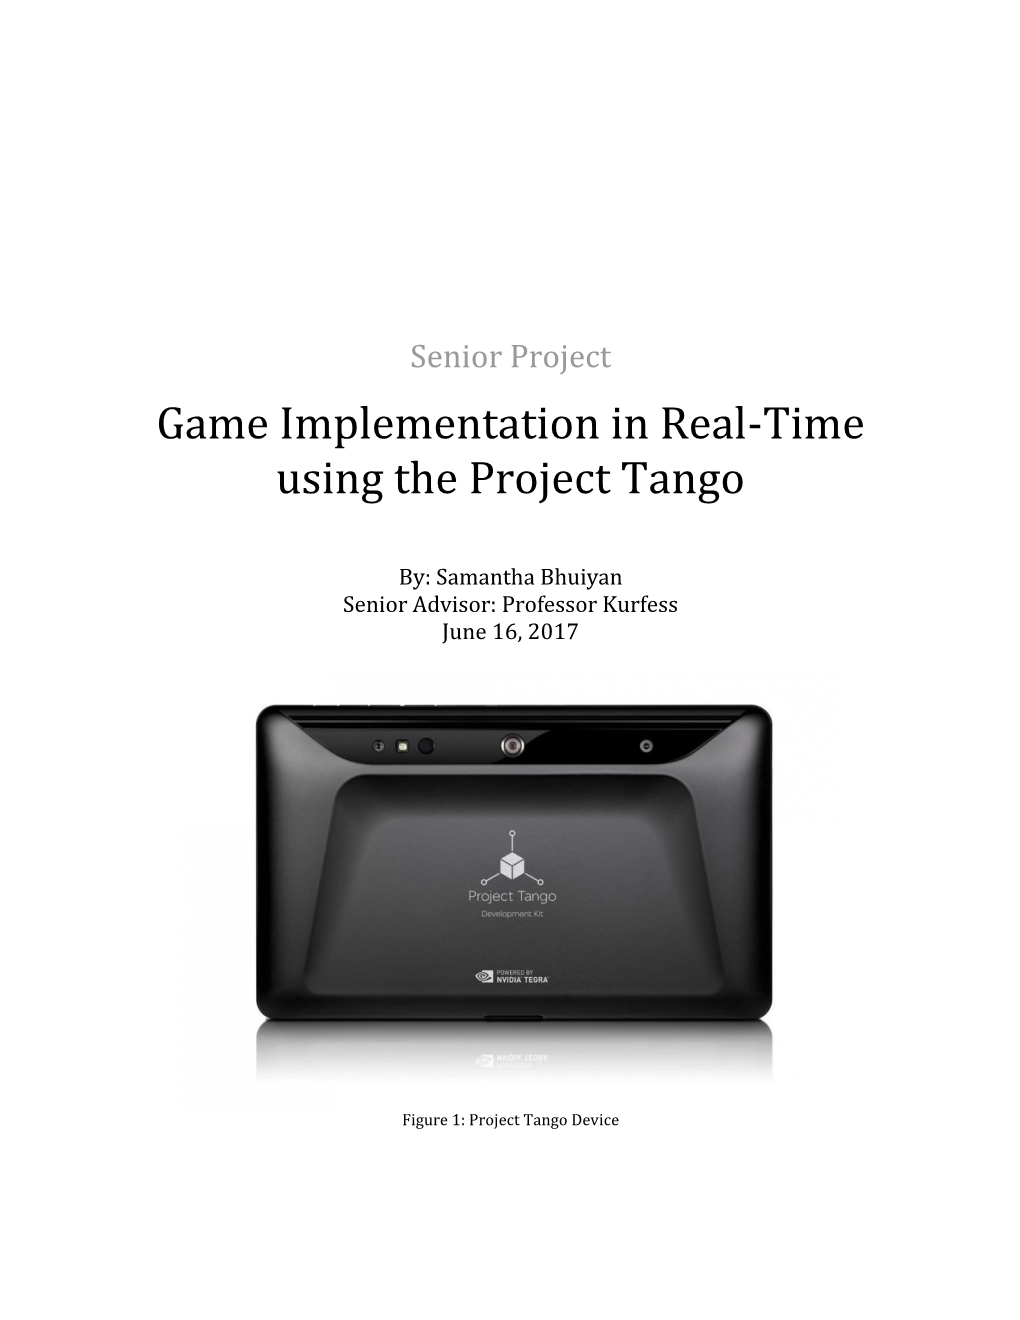 Game Implementation in Real-Time Using the Project Tango